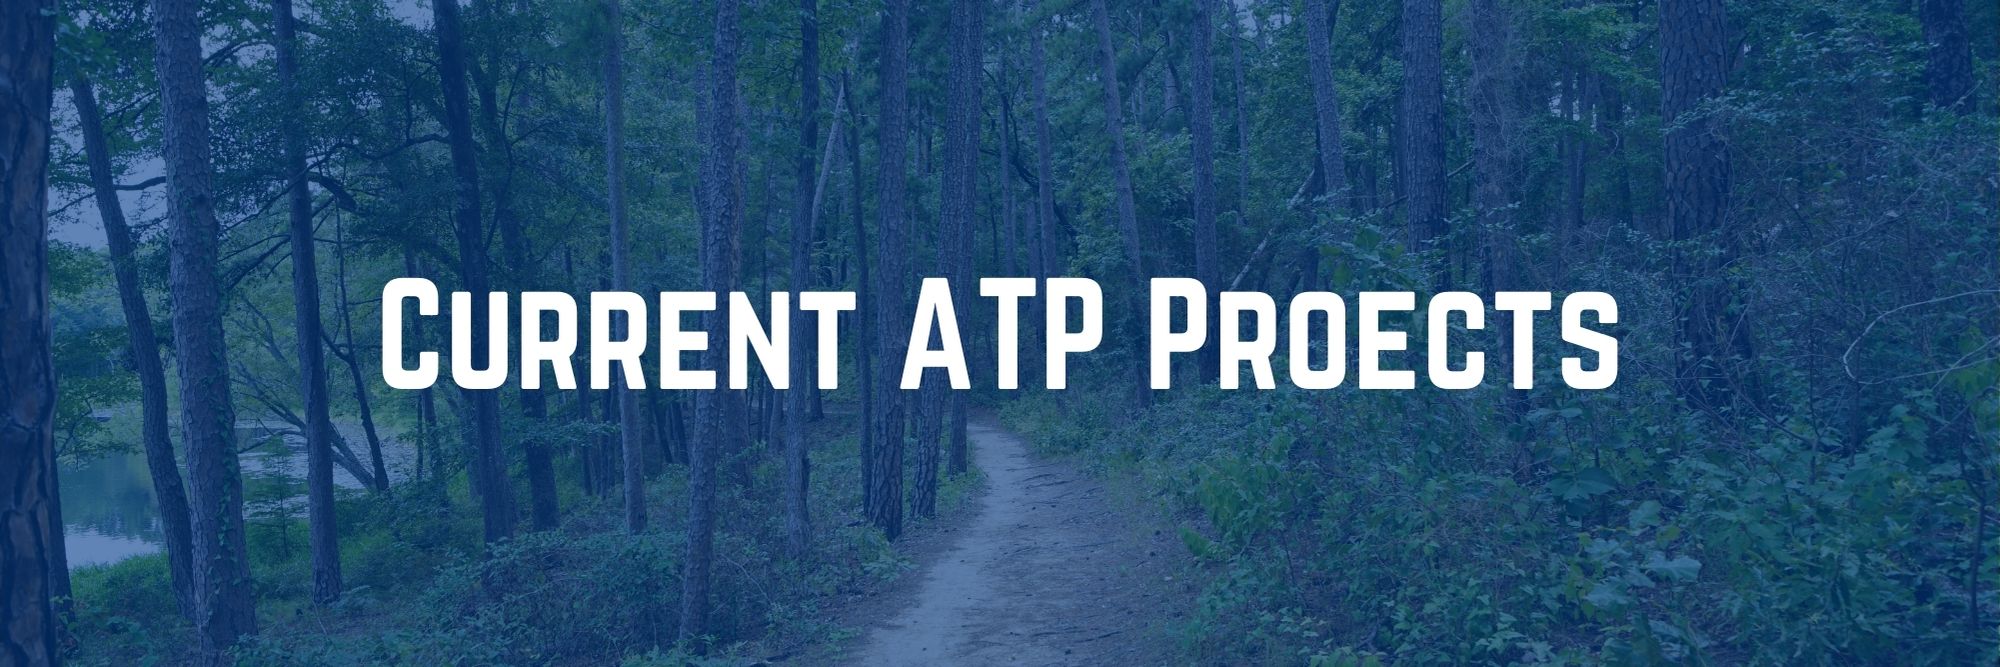 Current ATP Projects